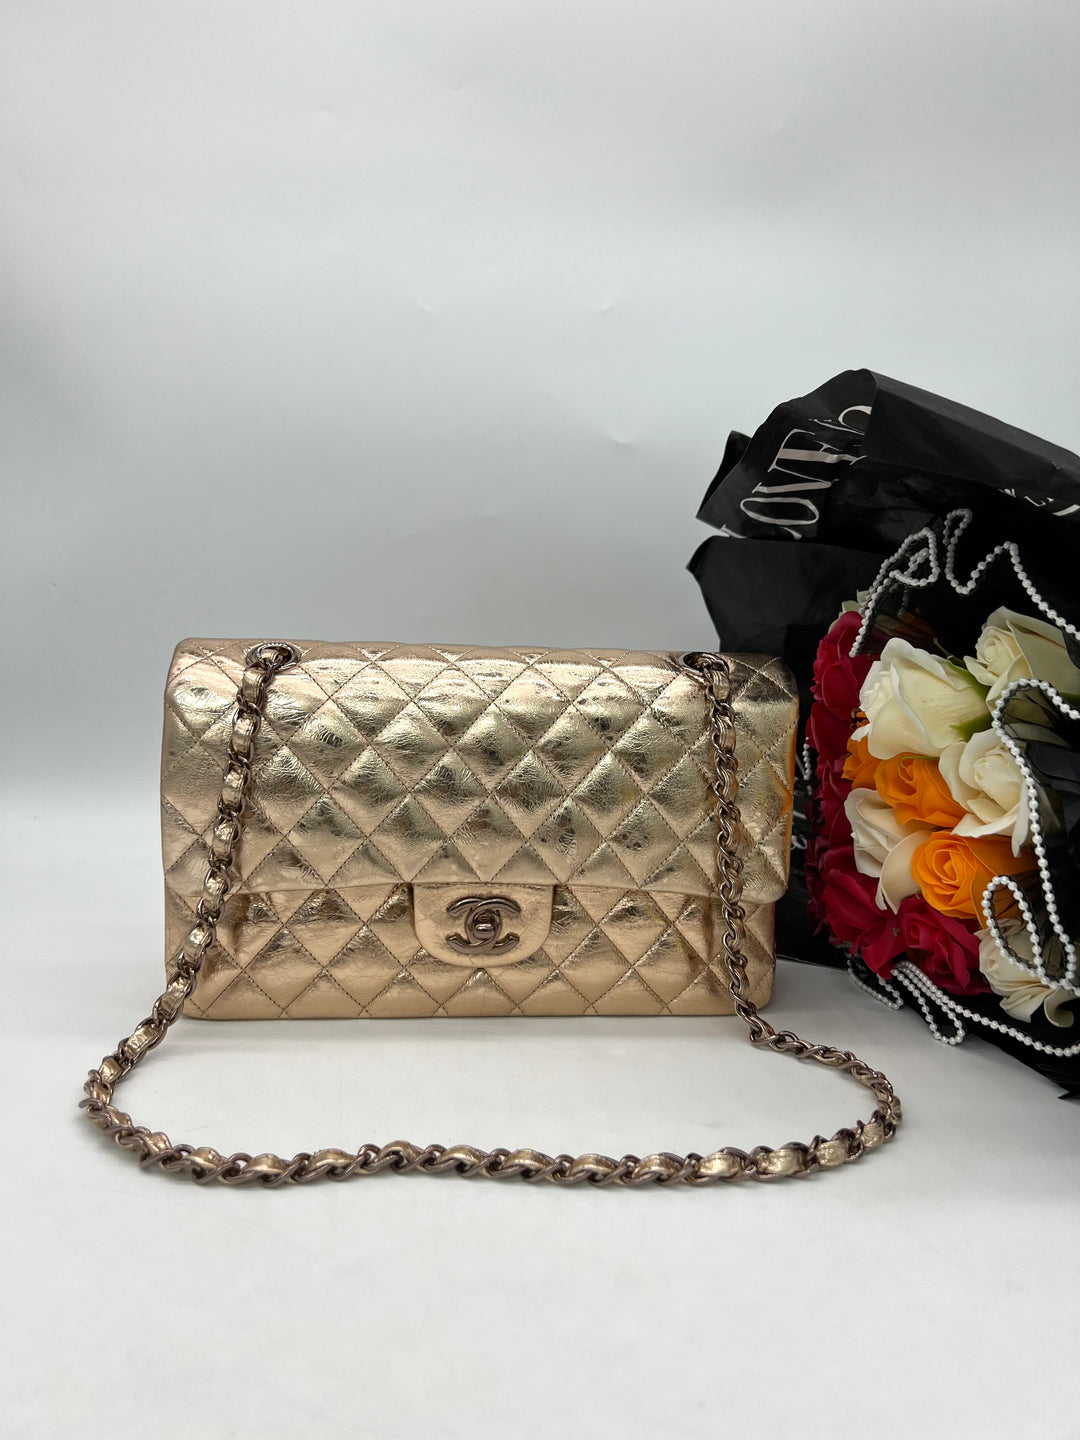 CHANEL Metallic Quilted Aged Calf Leather 226 Reissue 2.55 Flap Bag